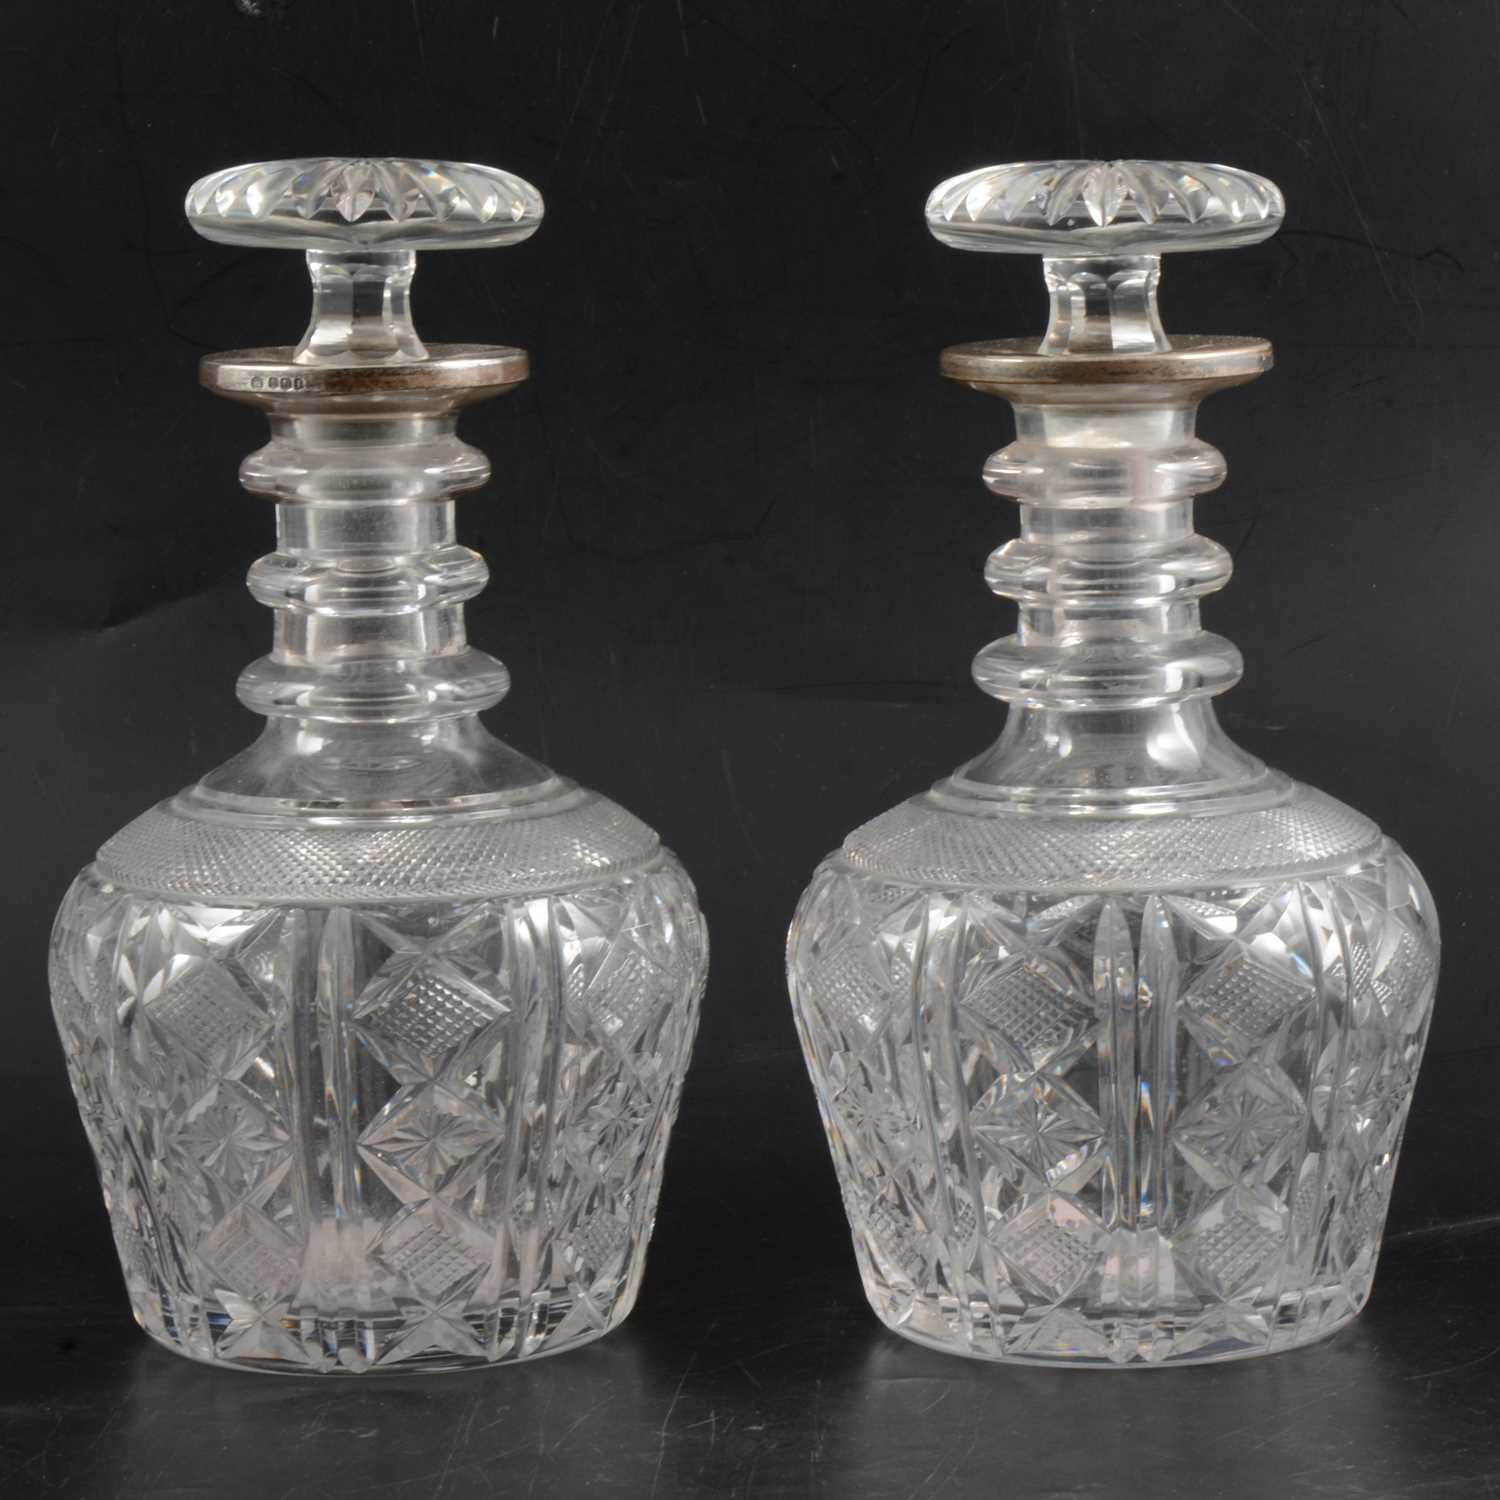 Lot 1 - Pair of crystal decanters with silver collars, John Round & Son Ltd, Sheffield 1926.